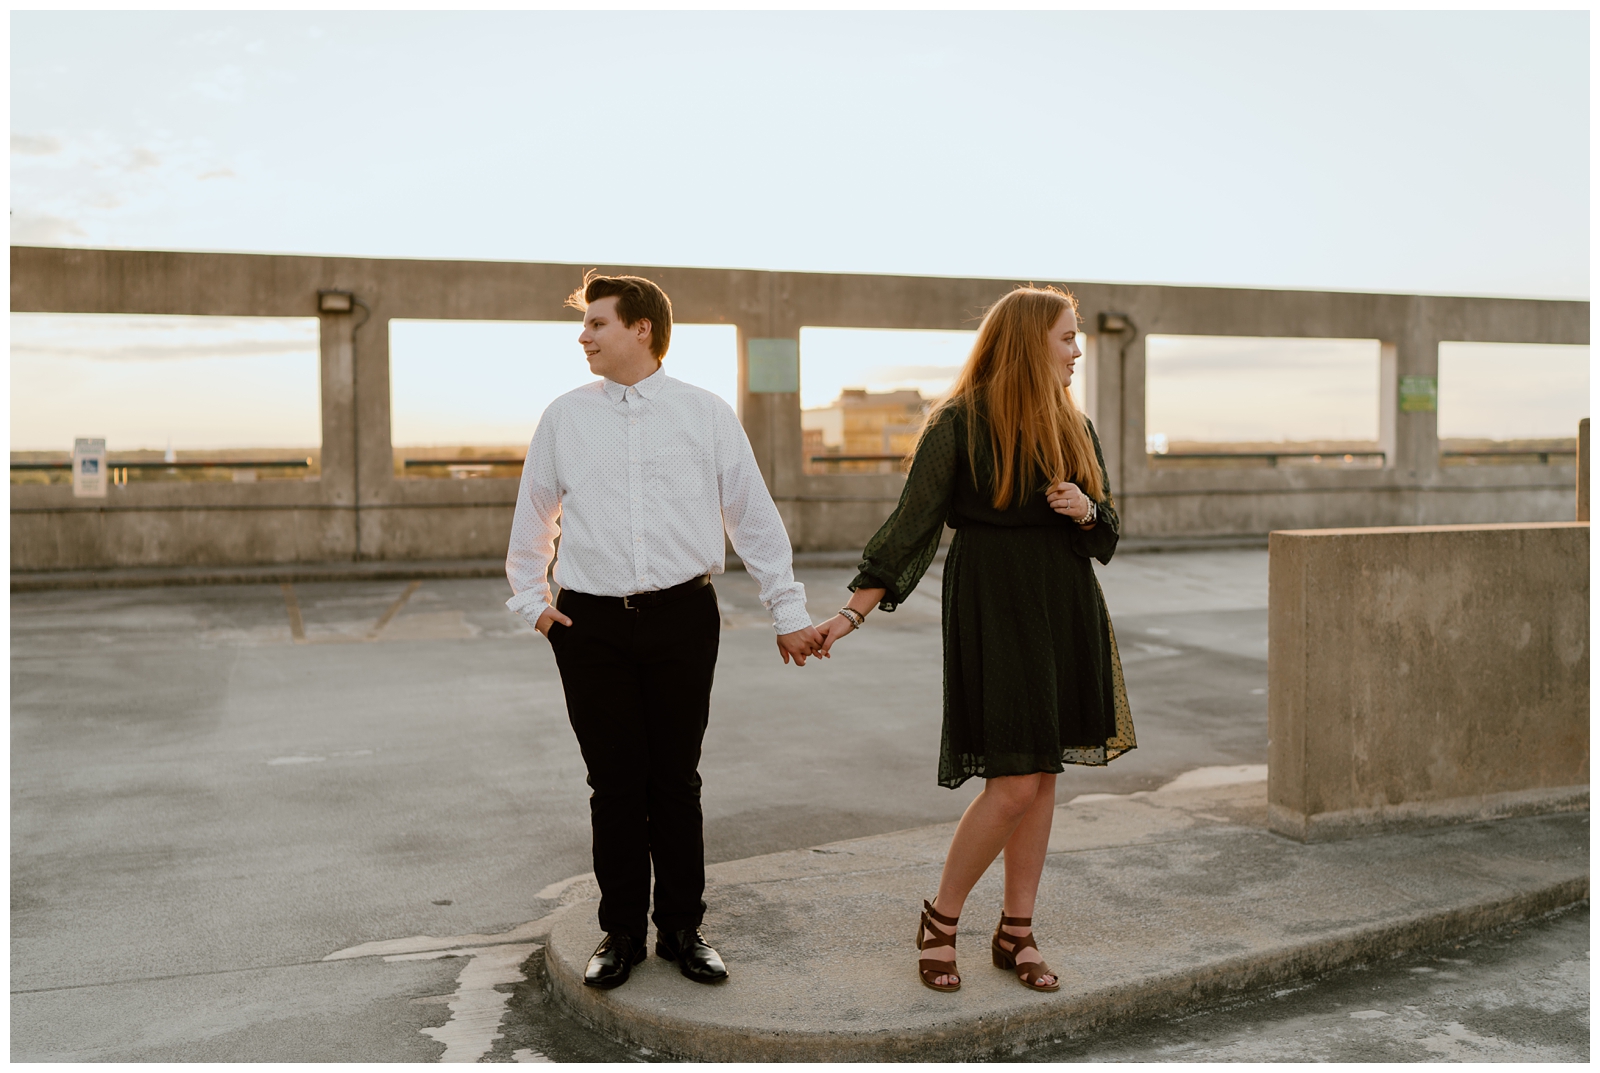 Golden hour downtown Greensboro, NC engagement session by North Carolina wedding photographer